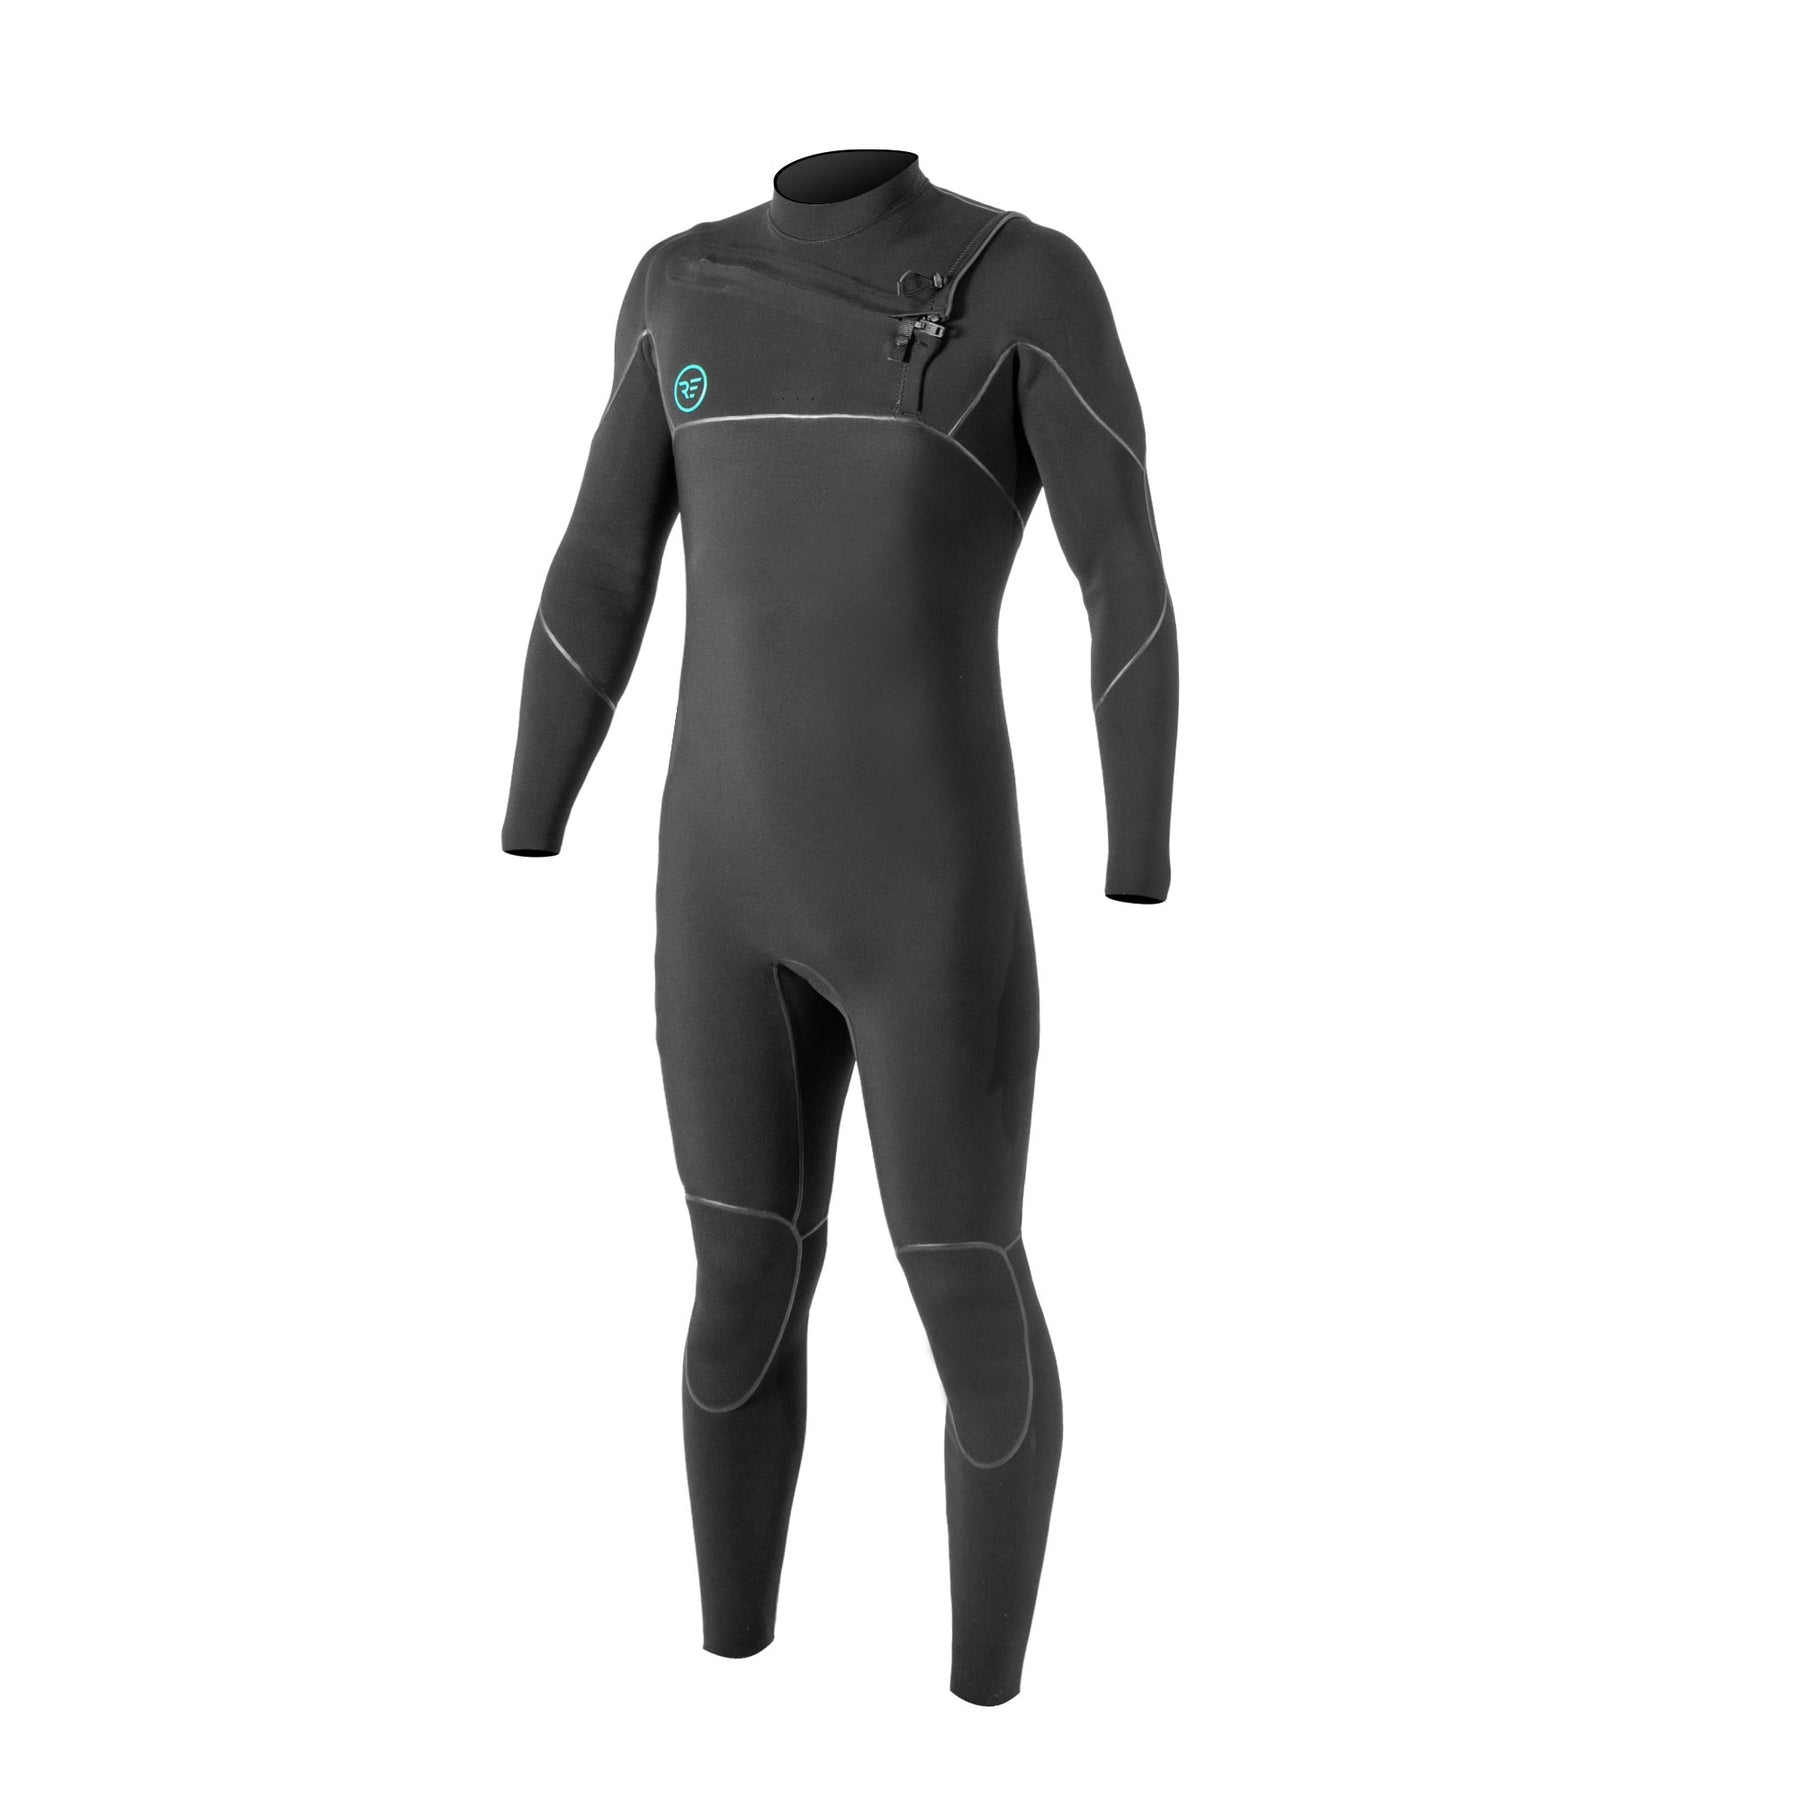 Ride Engine Apoc 5/4/3 FZ Wetsuit – L – The Foiling Collective